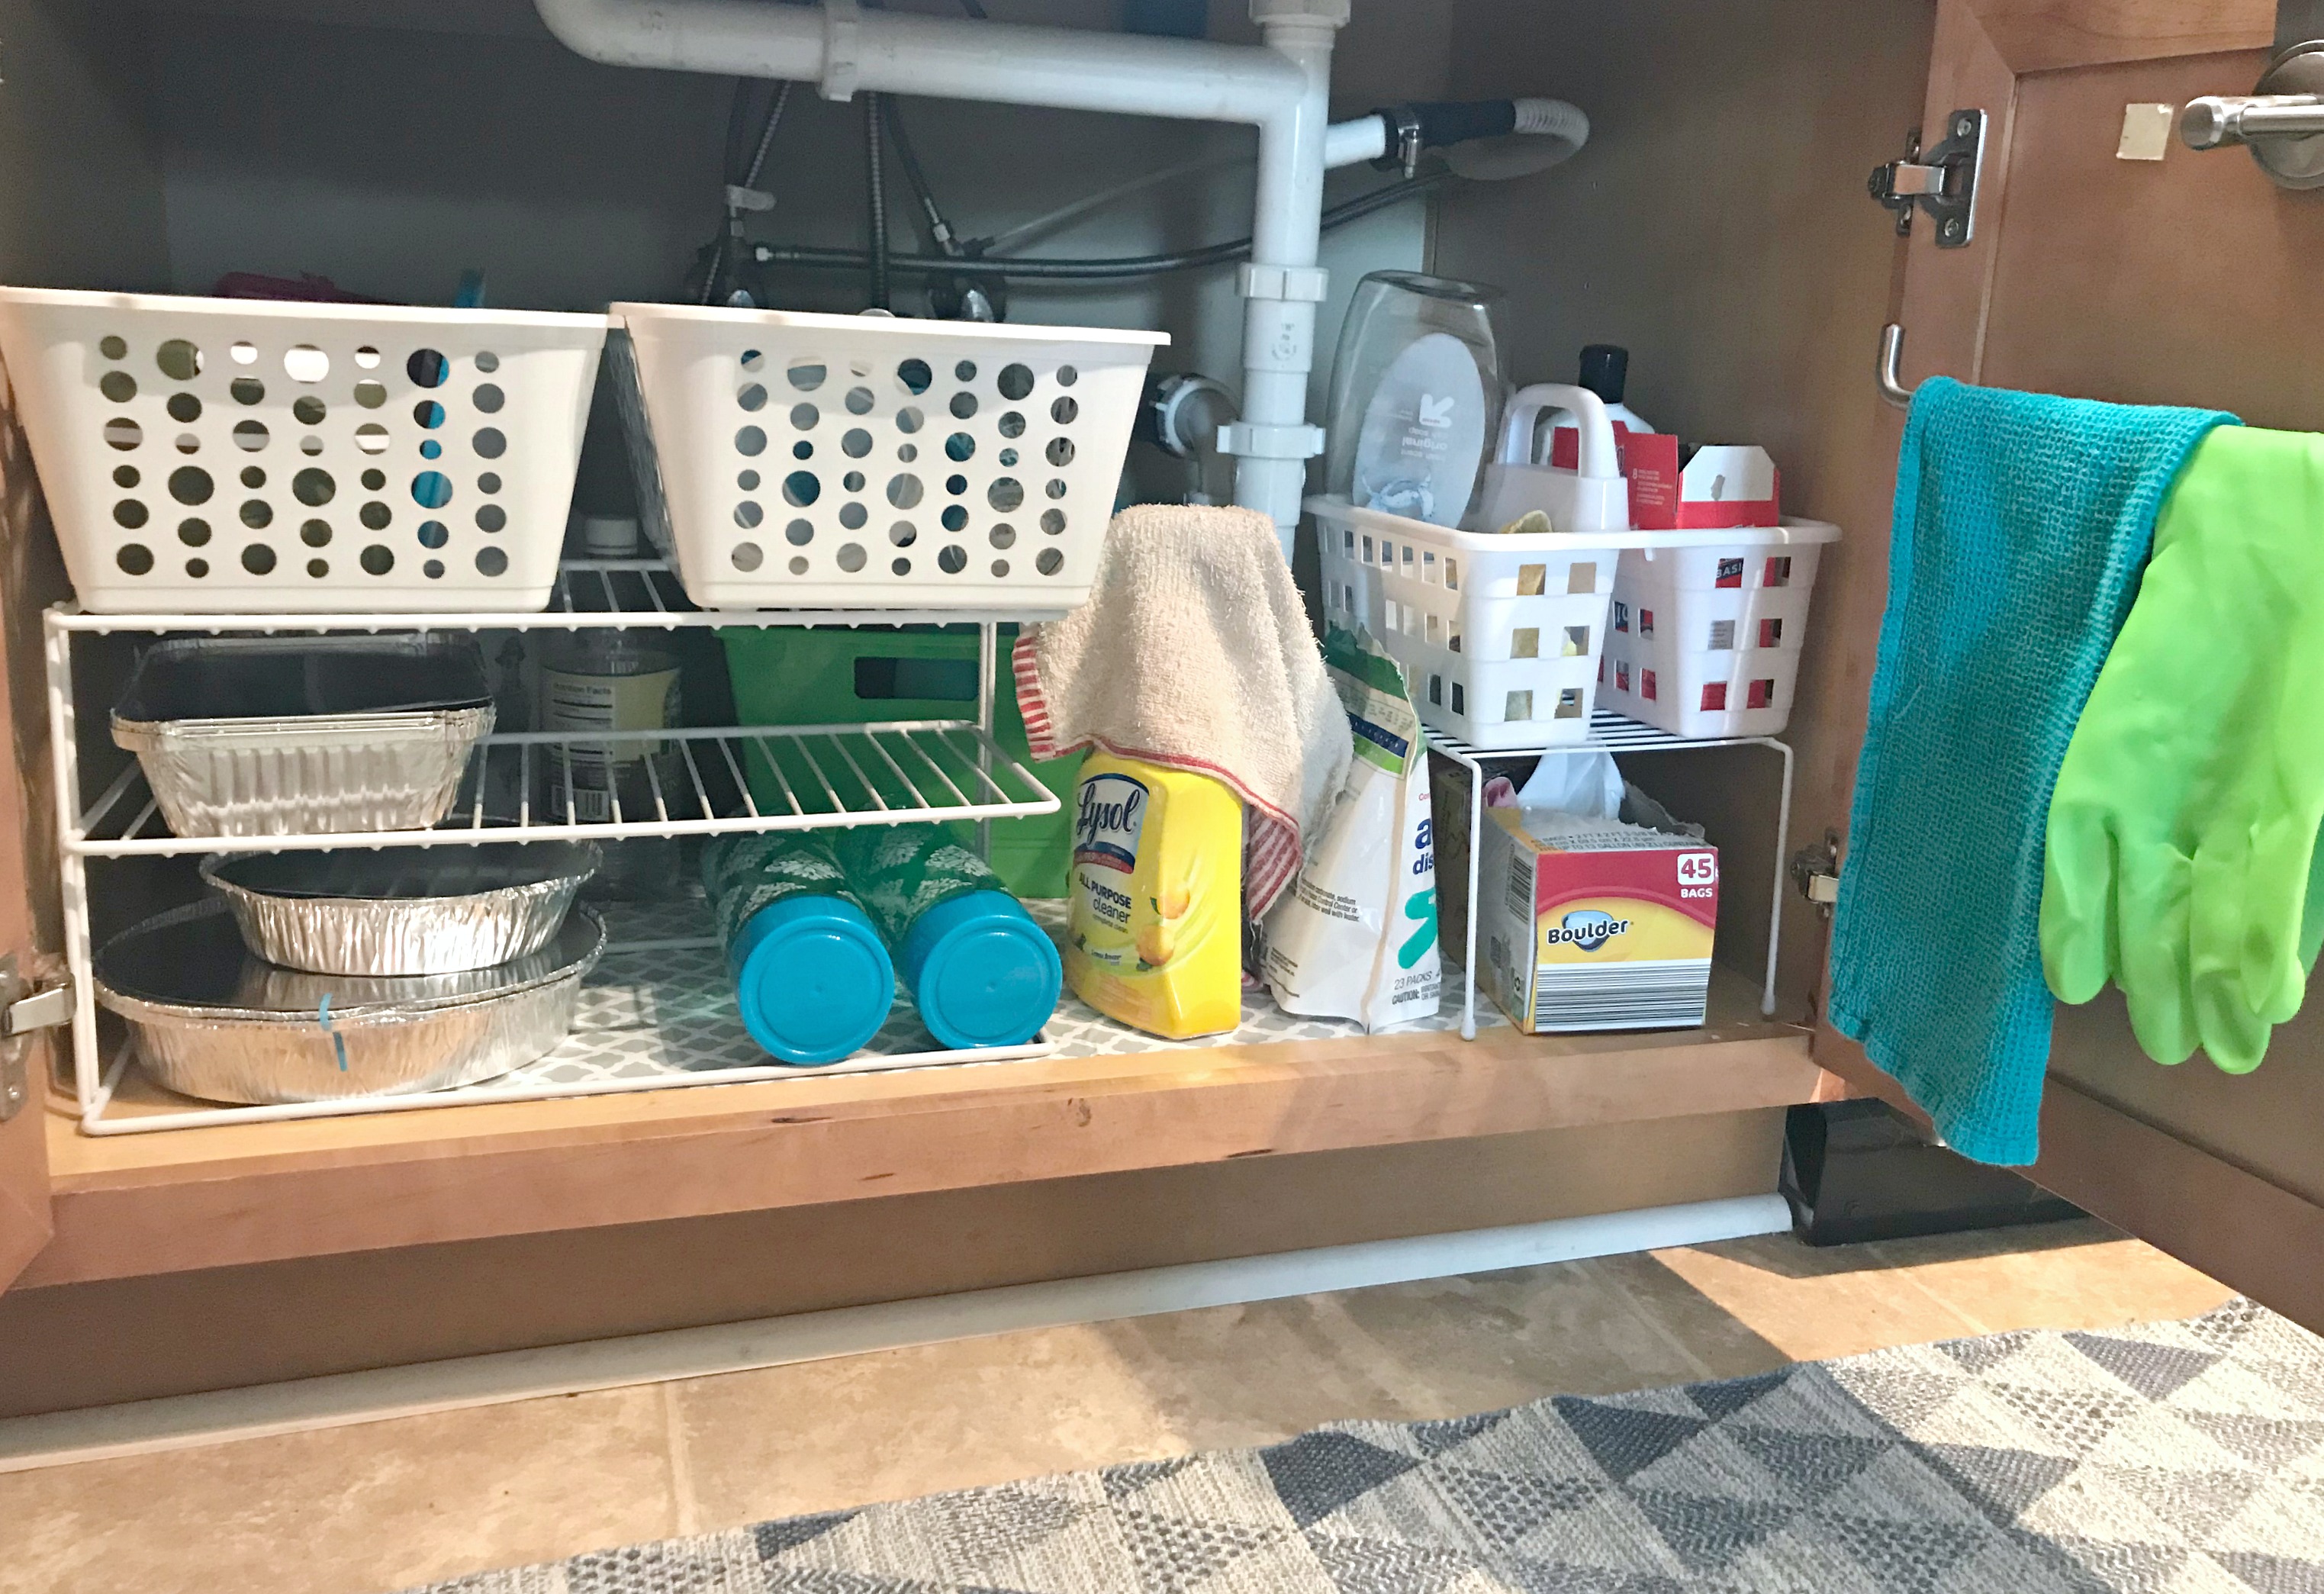 How to Organize a Kitchen Sink So You Can Find Anything in Seconds